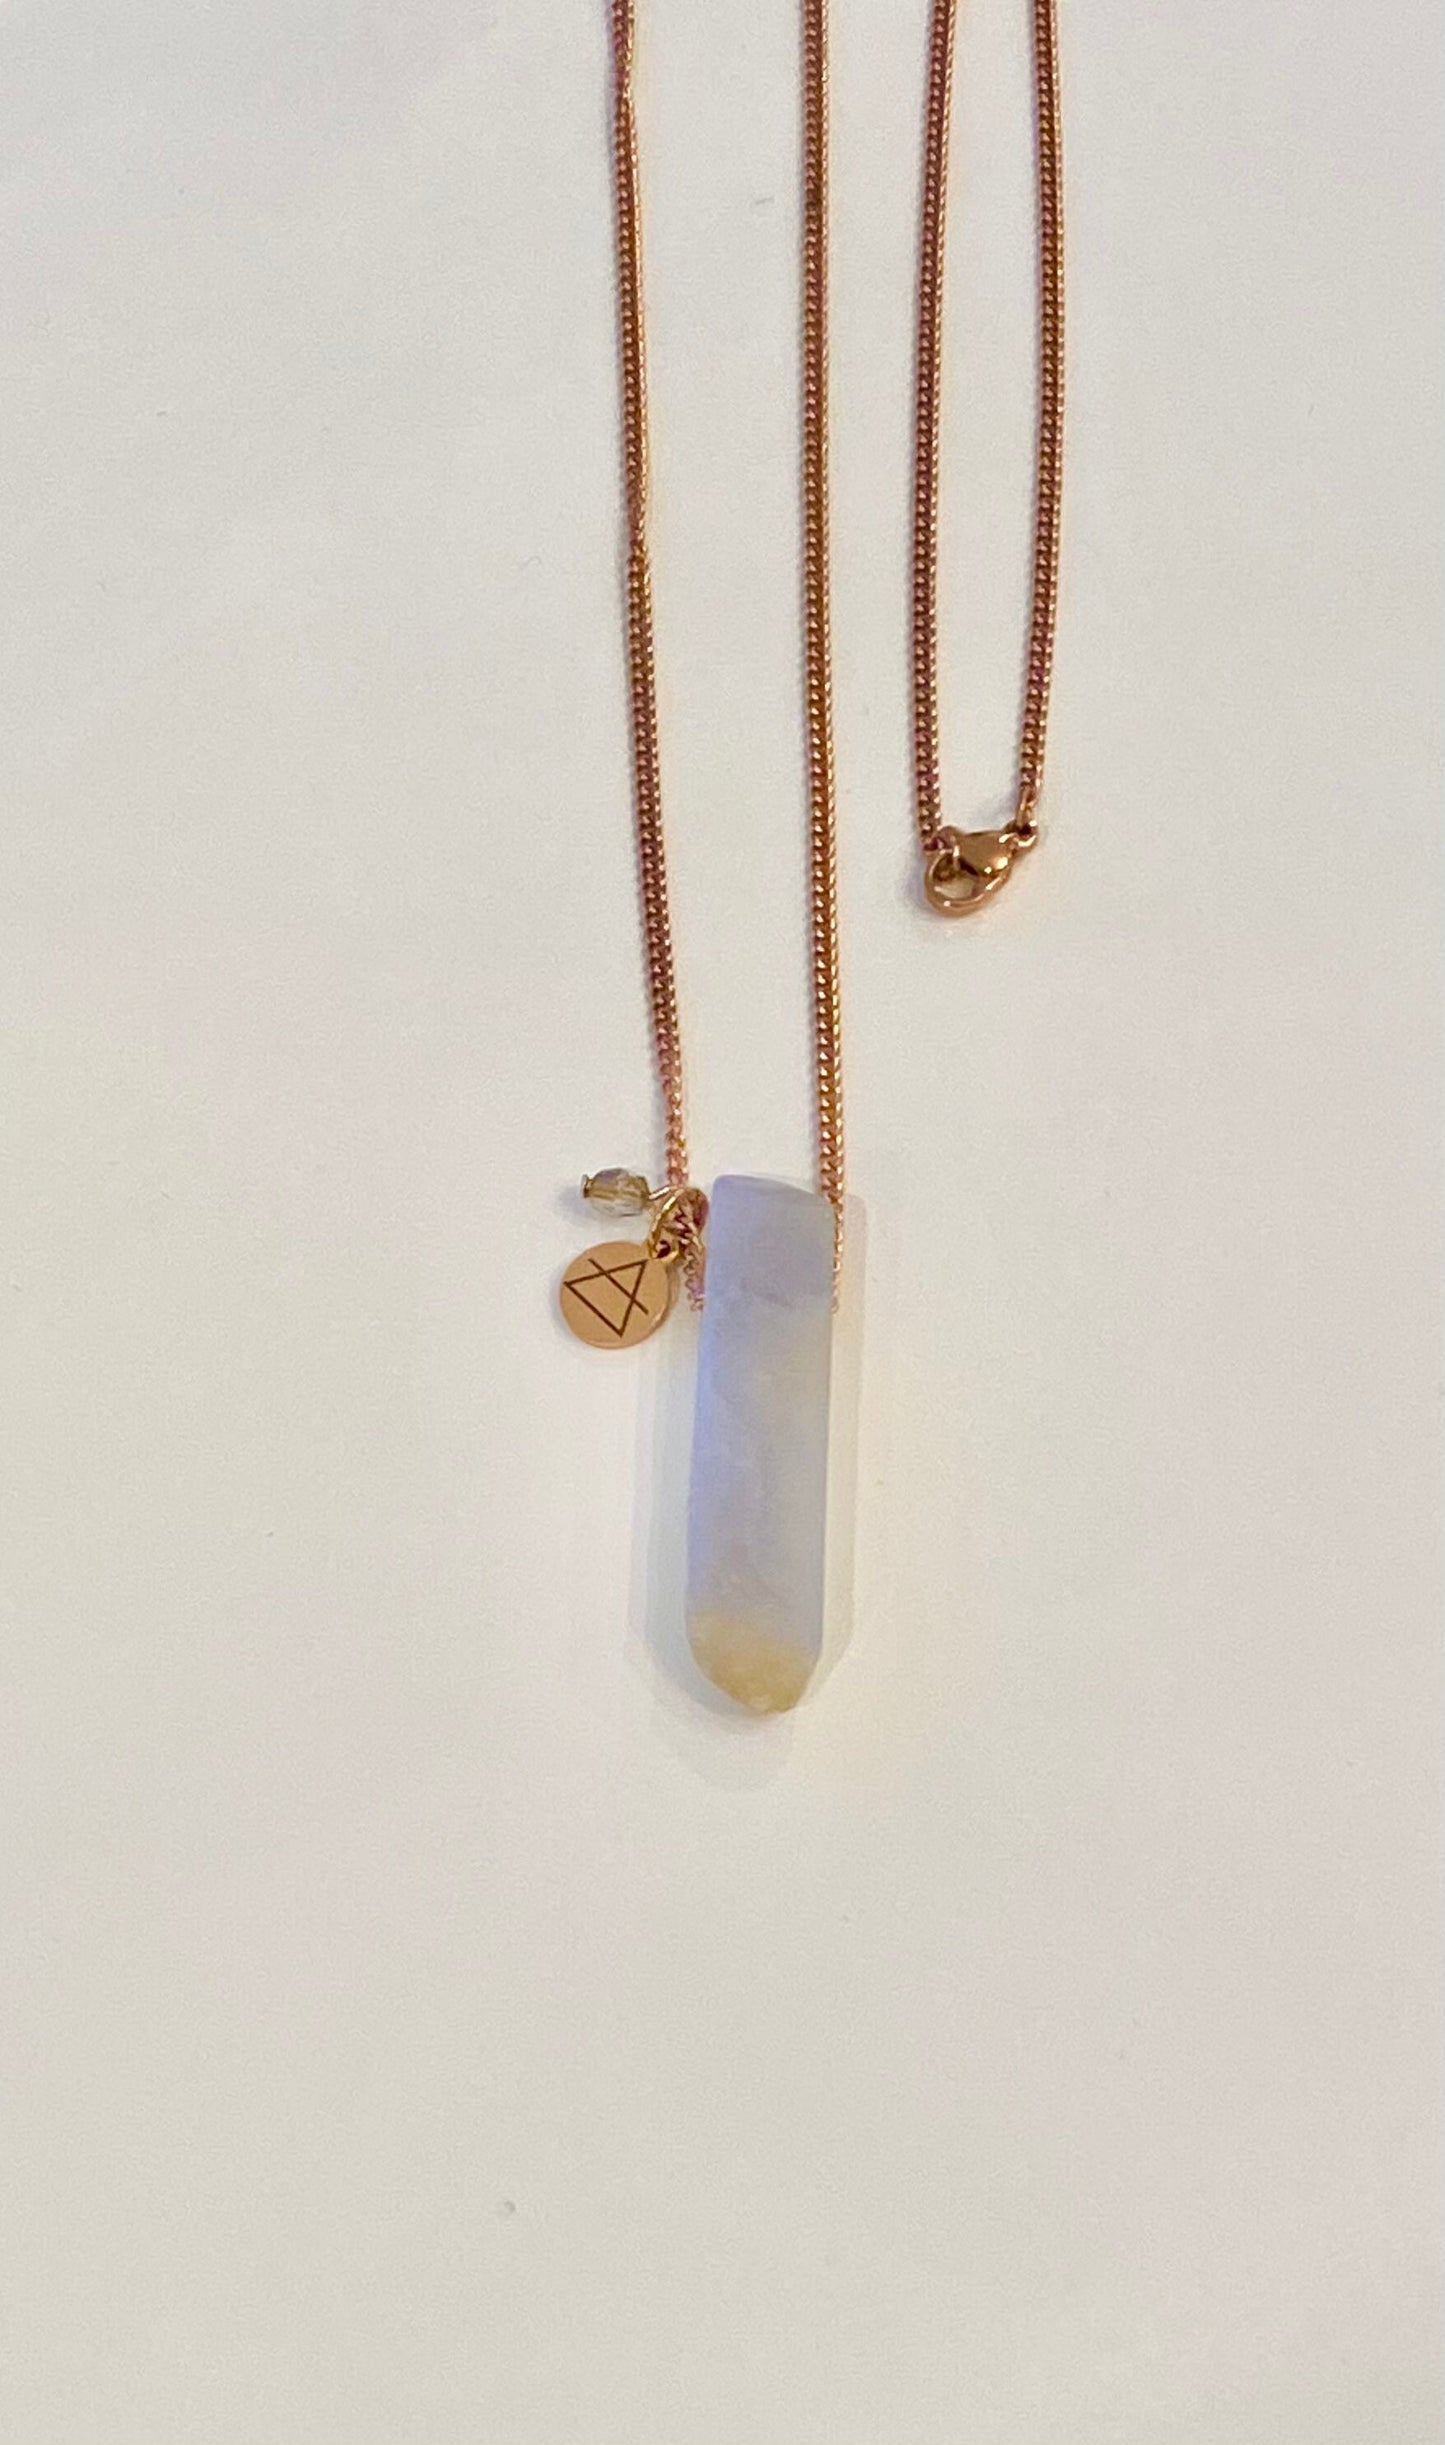 Long rose gold natural stone pendant necklace, crystal necklace, blue lace agate, stainless, natural stone, pendant necklace, healing